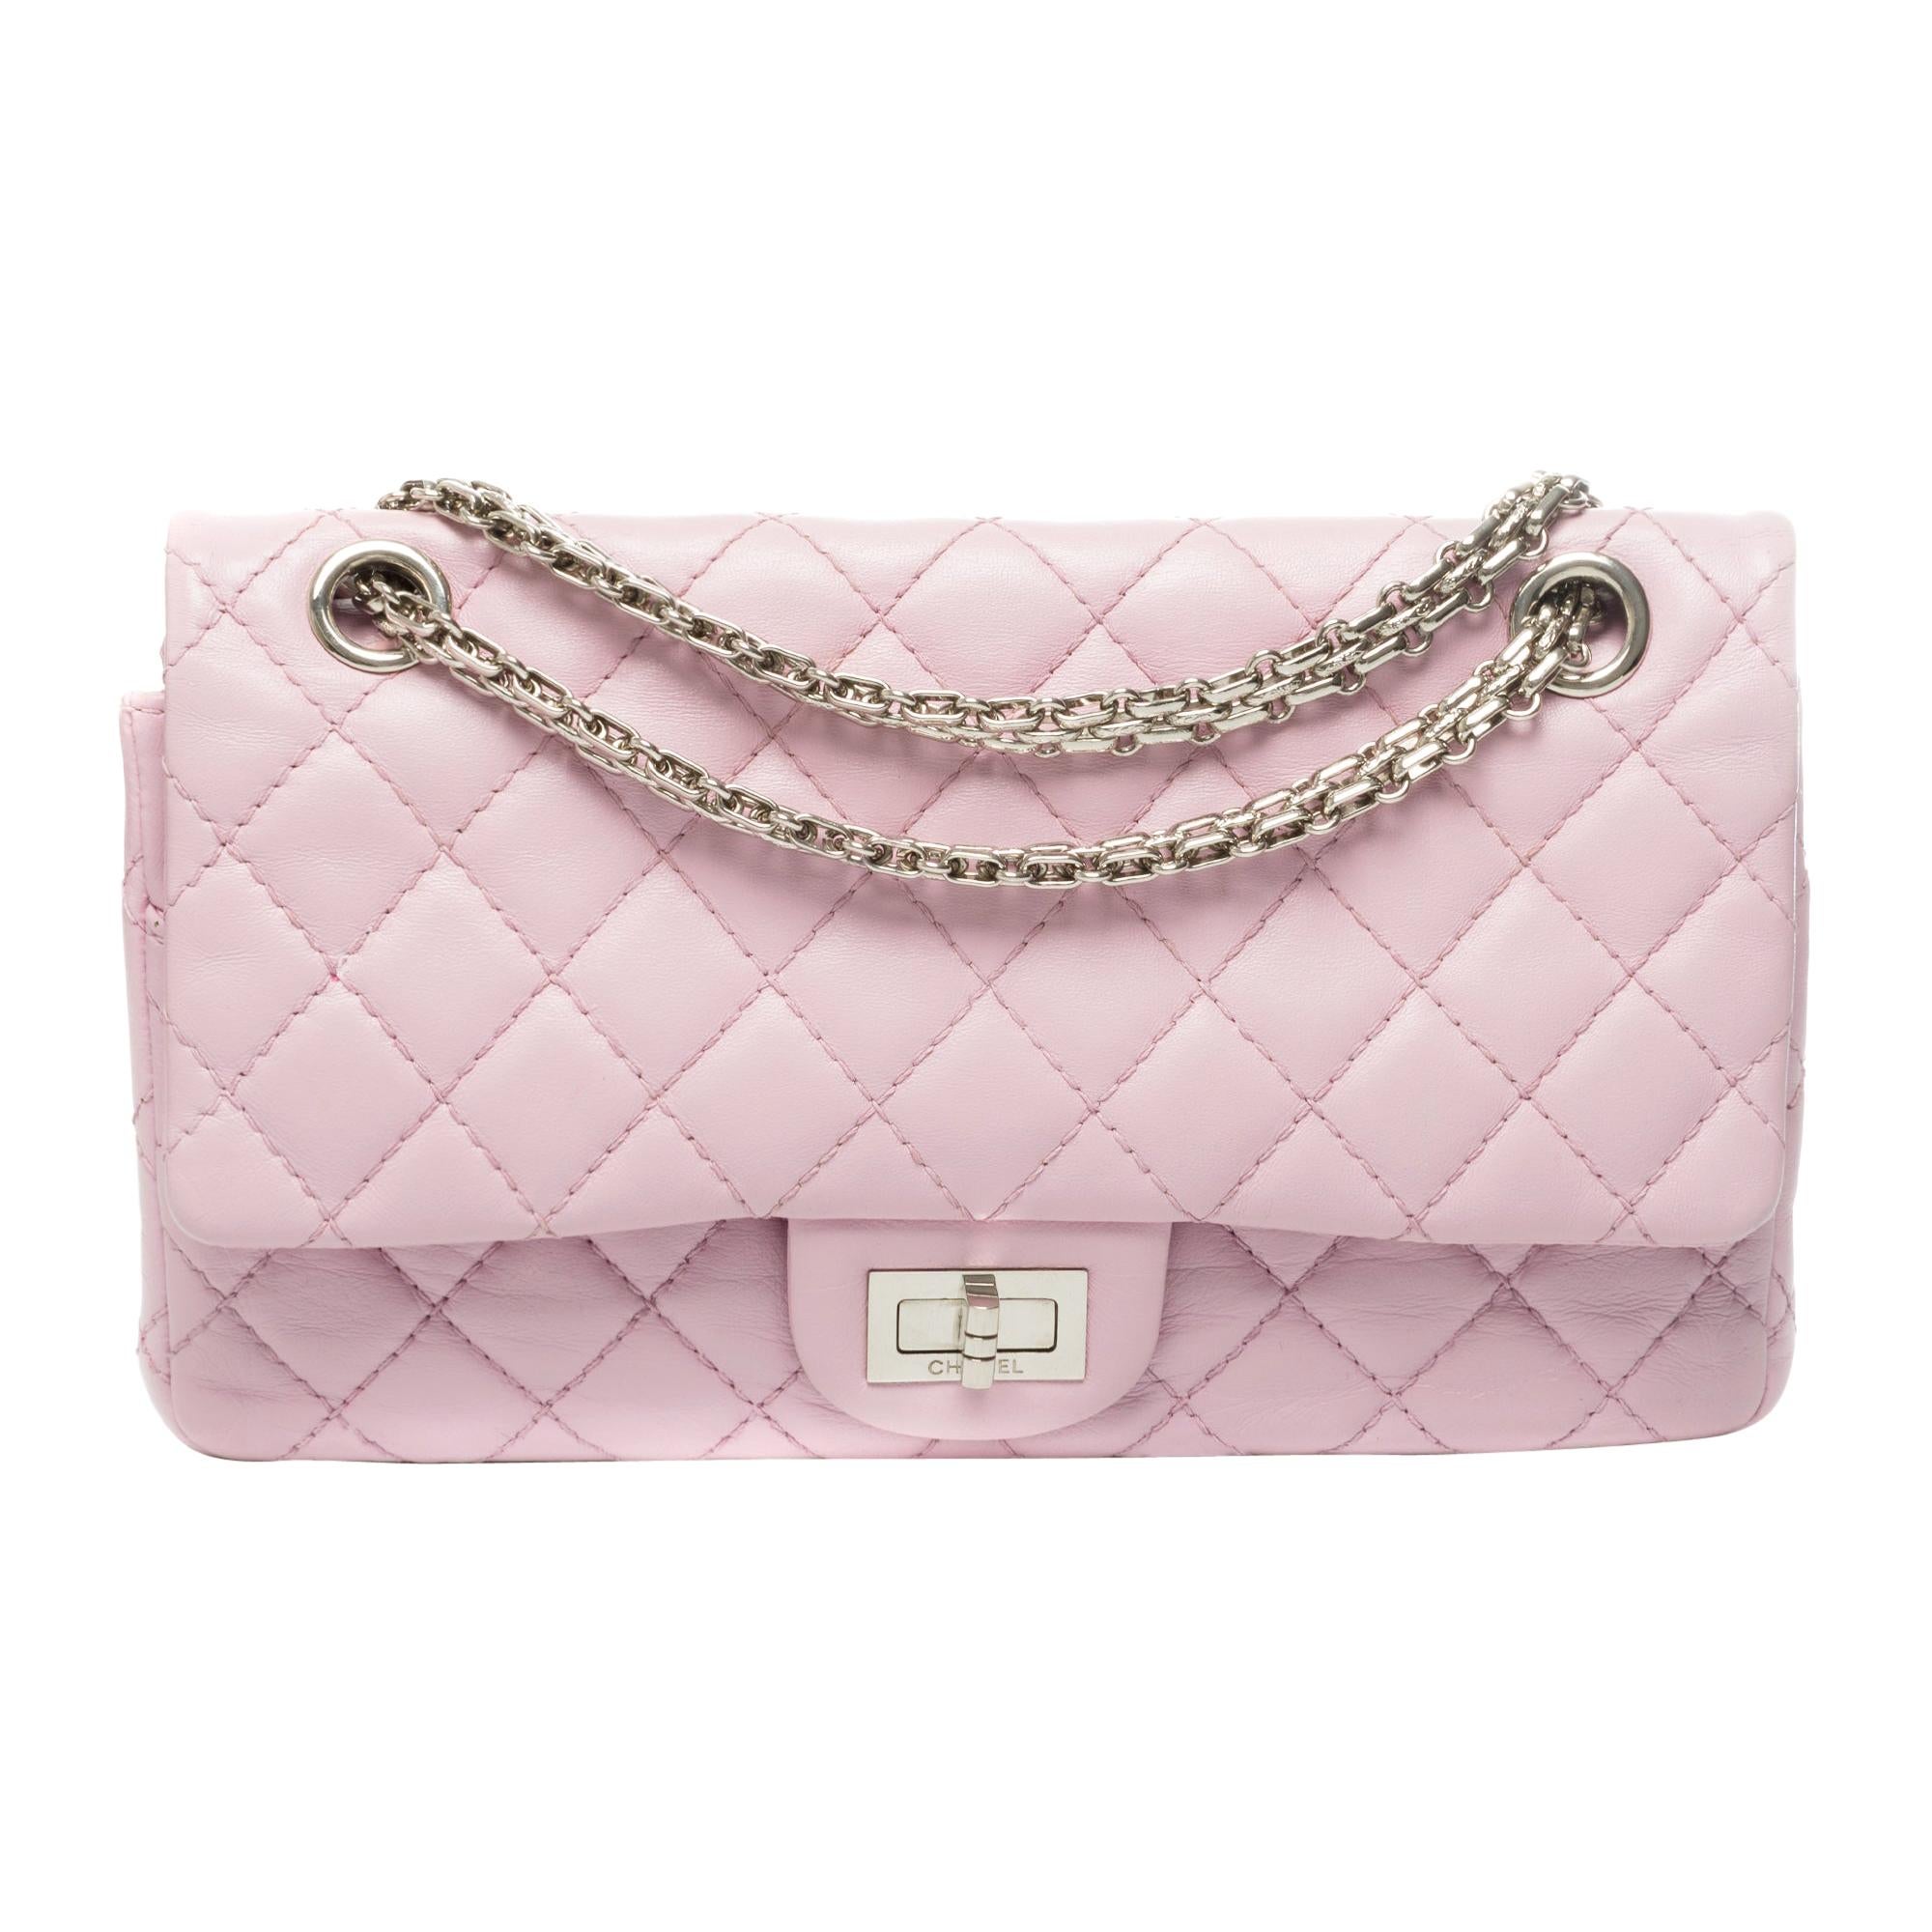 Stunning Chanel 2.55 shoulder bag in pink quilted leather with silver hardware